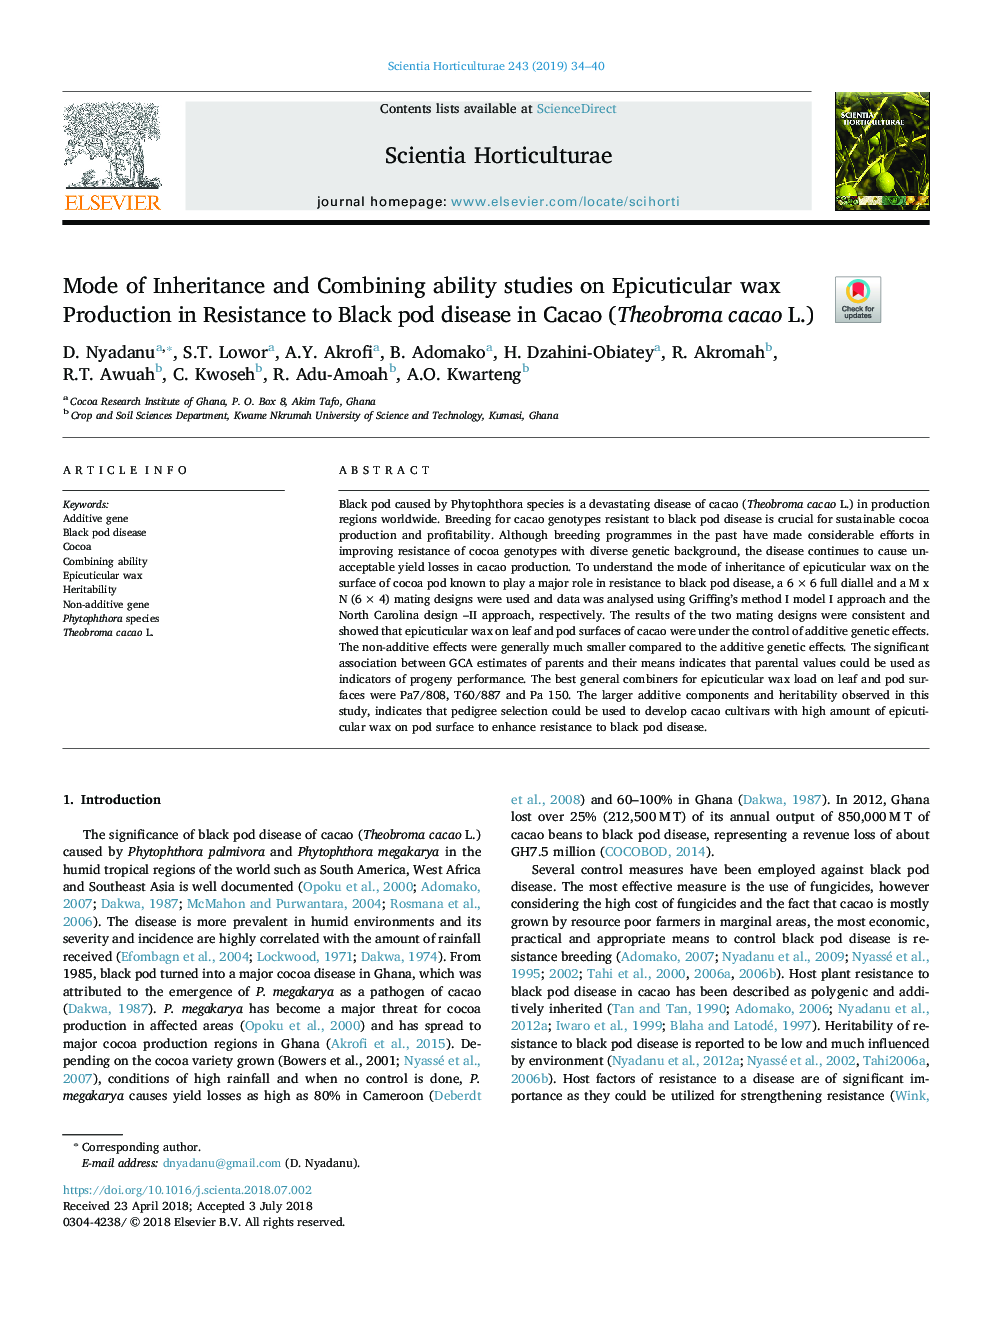 Mode of Inheritance and Combining ability studies on Epicuticular wax Production in Resistance to Black pod disease in Cacao (Theobroma cacao L.)